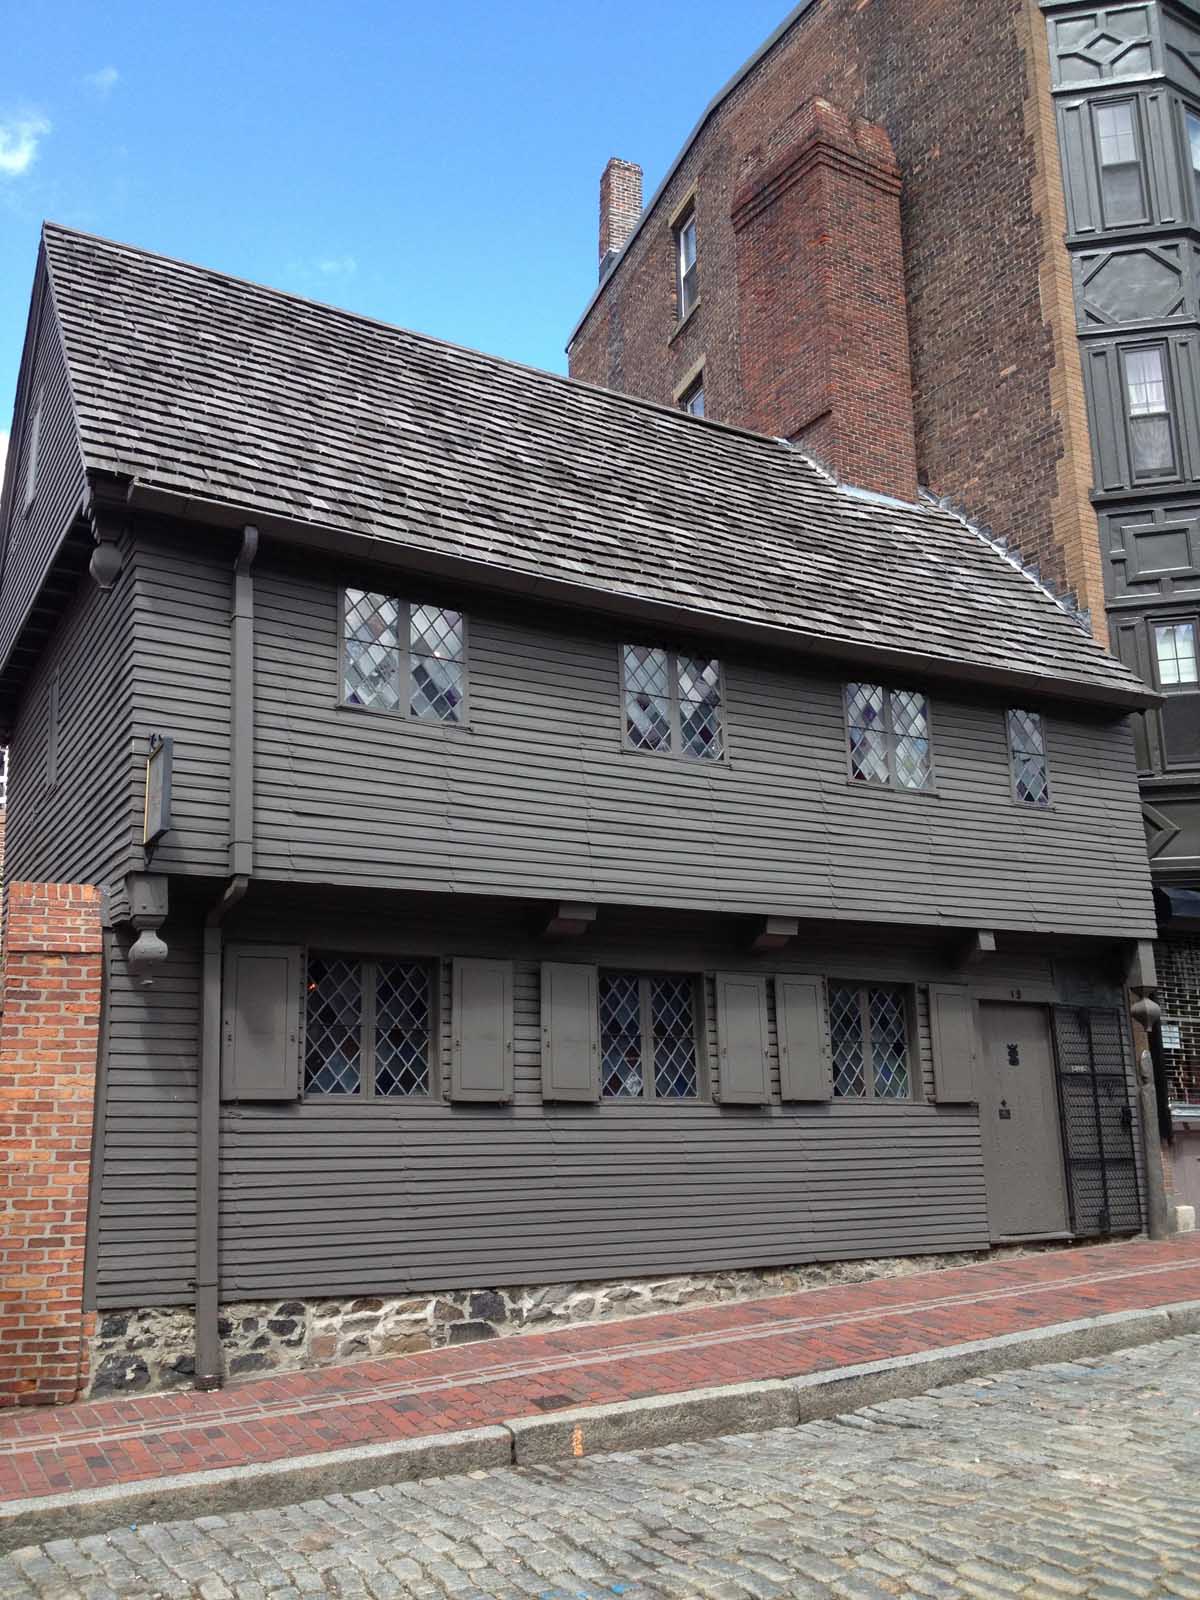 Things to do in Boston Paul Revere House